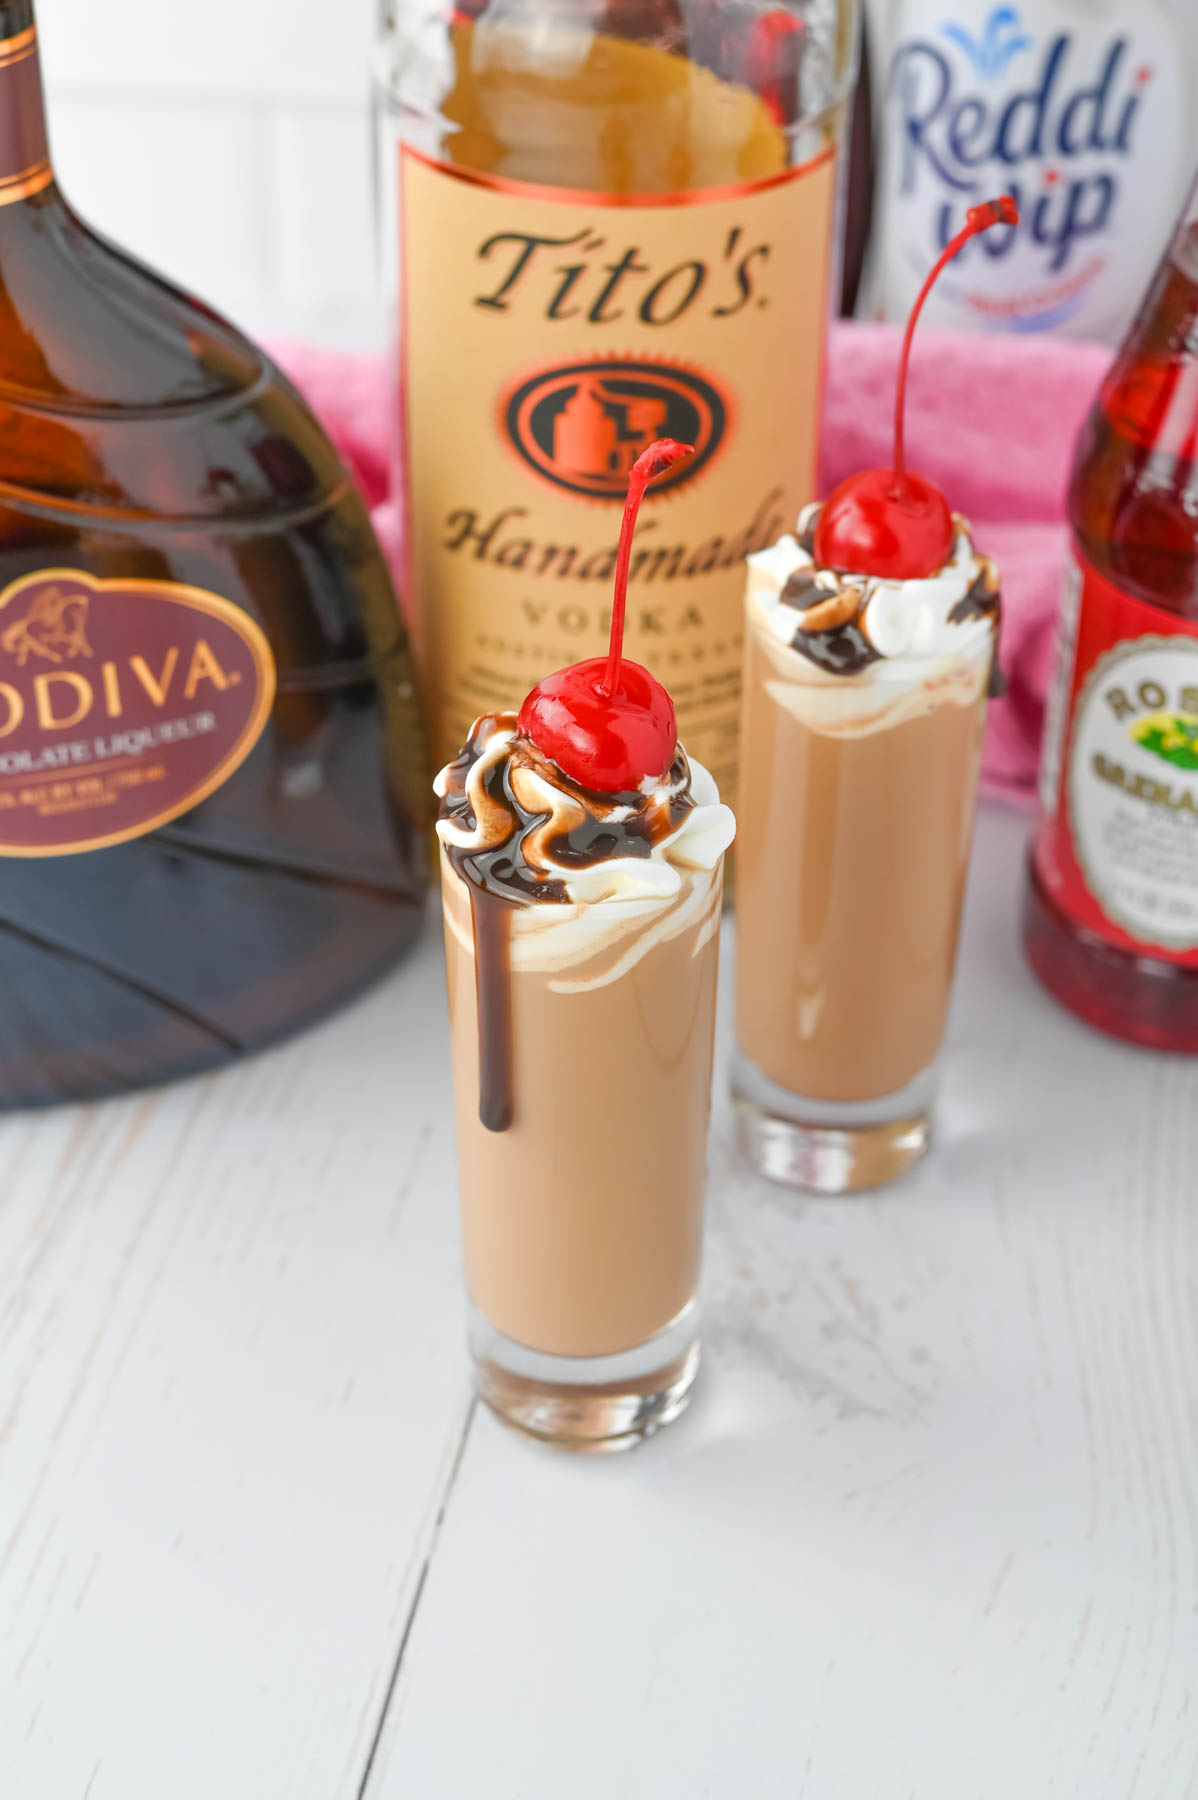 Two chocolate covered cherry shots with whipped cream and a bottle of tito's.